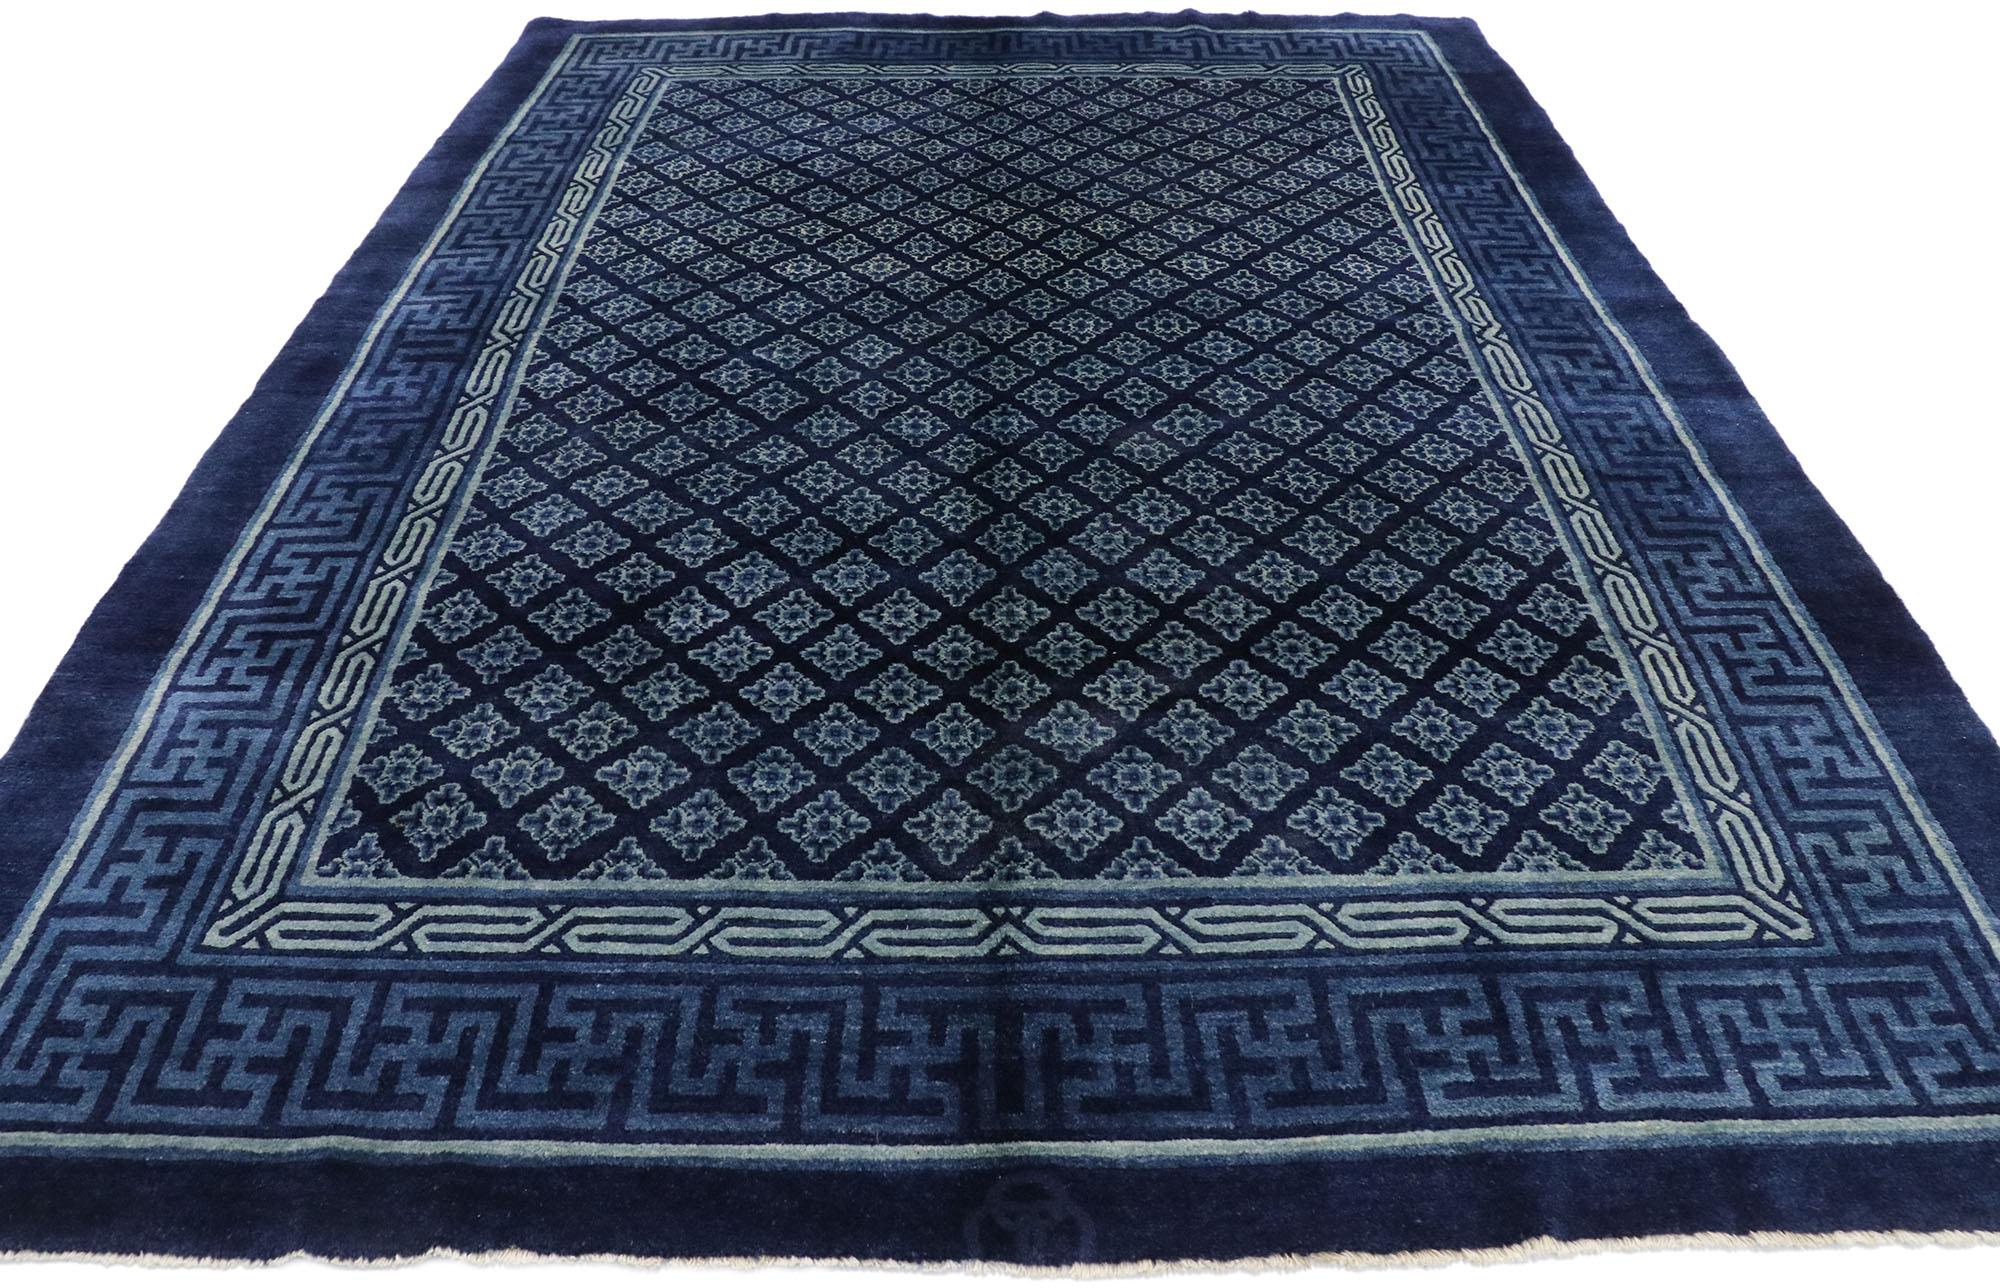 Hand-Knotted Antique Chinese Baotou Rug with Qing Dynasty Style